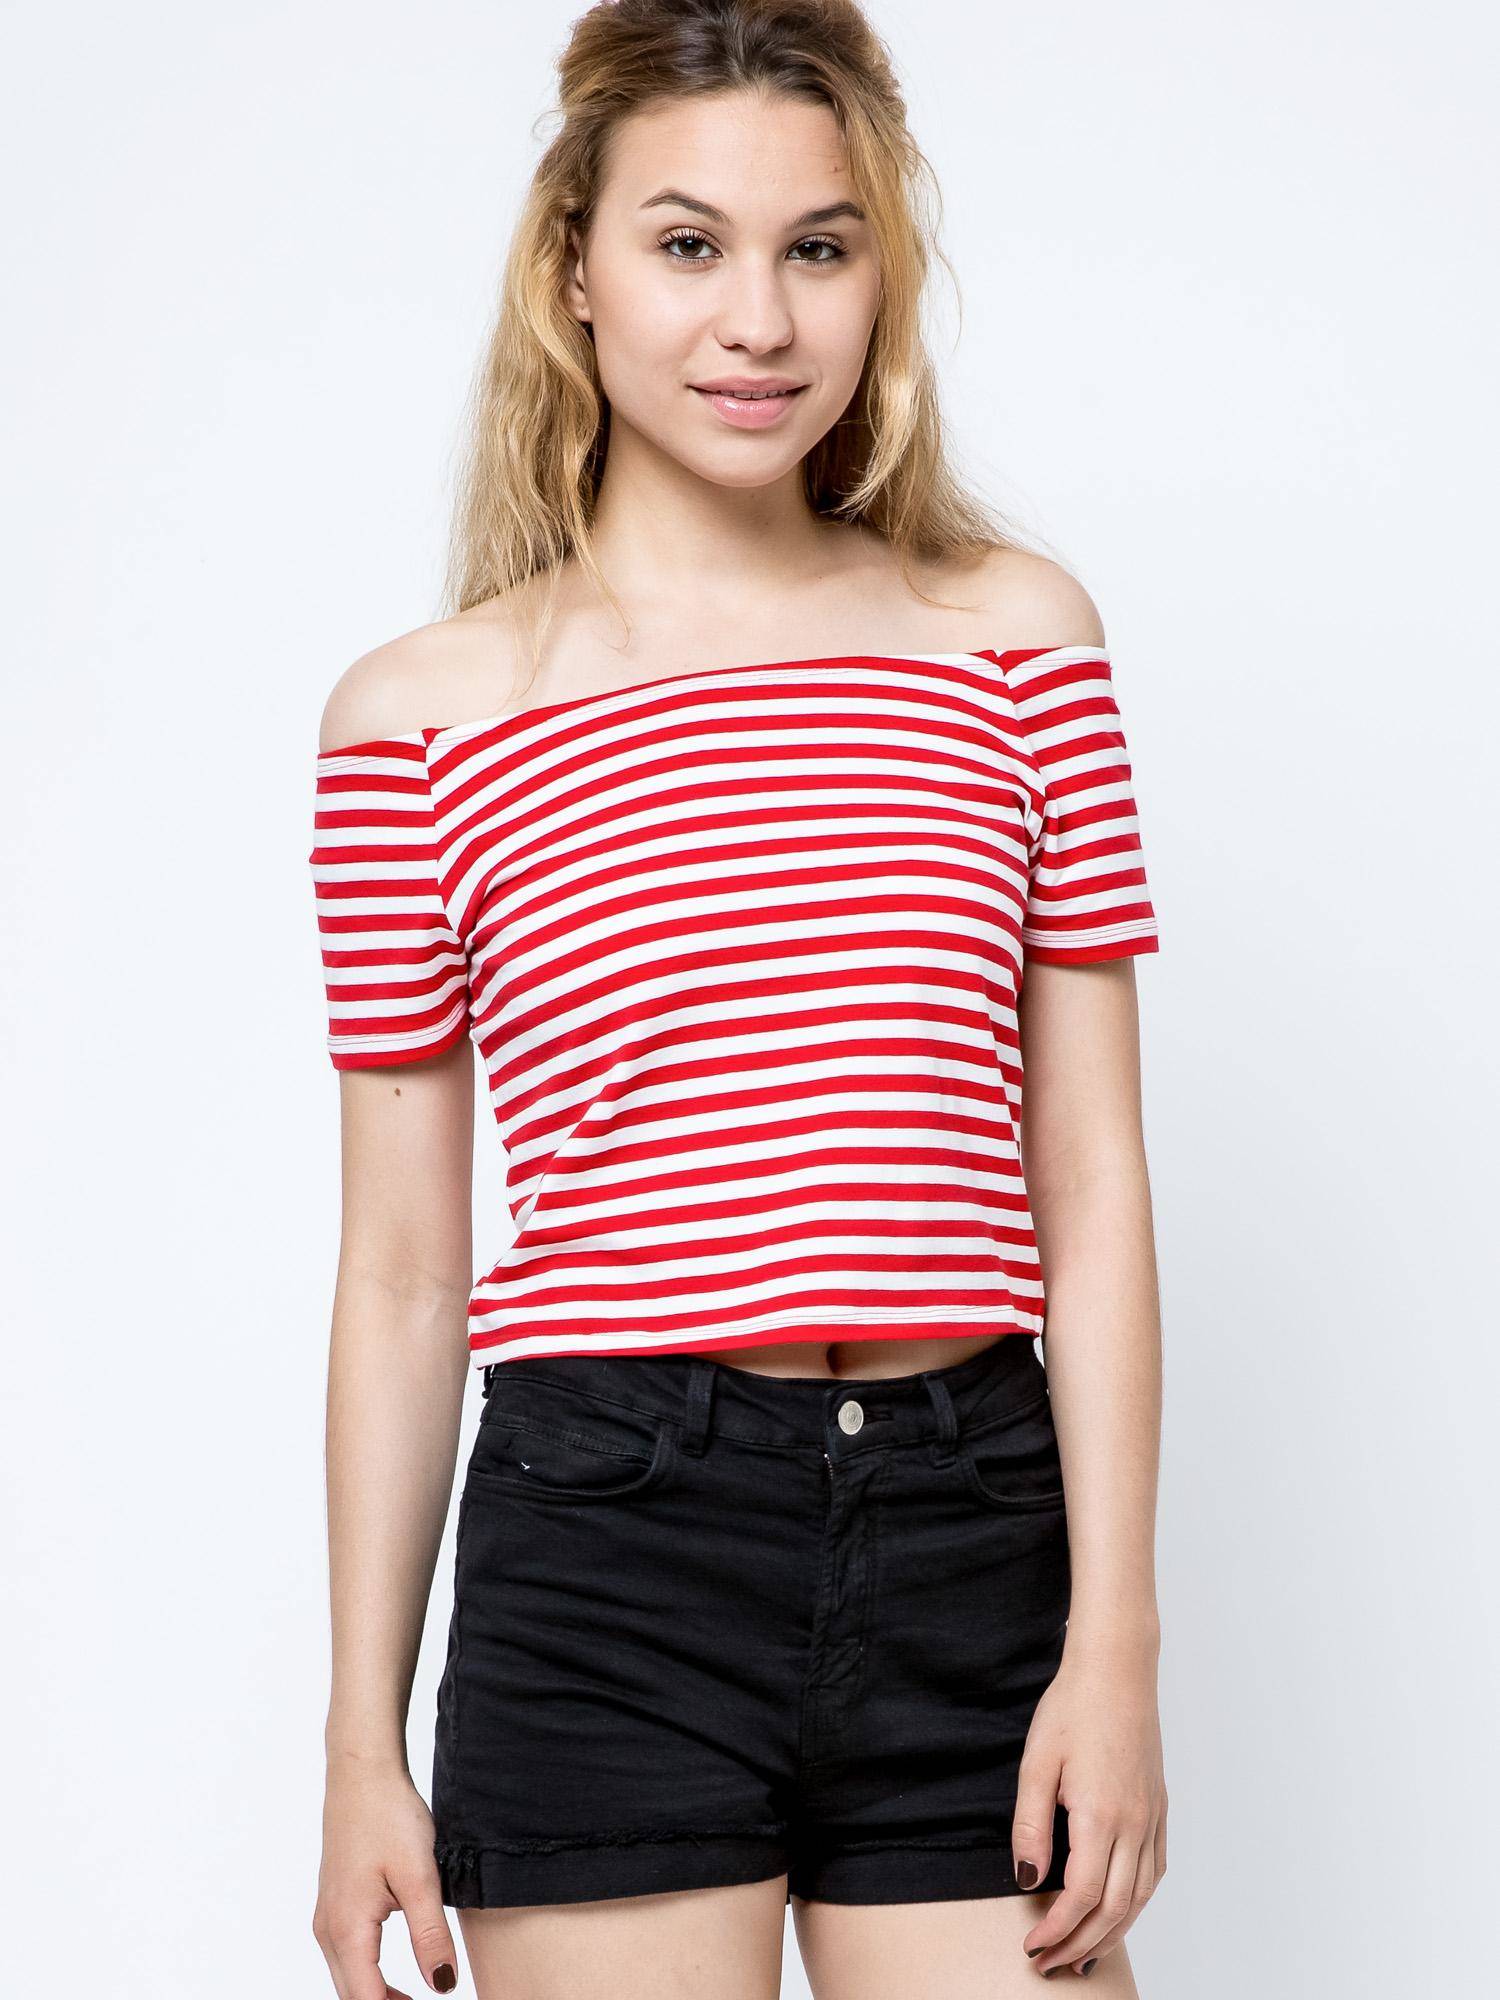 Short Blouse With Carmen Neckline White With Red Stripes